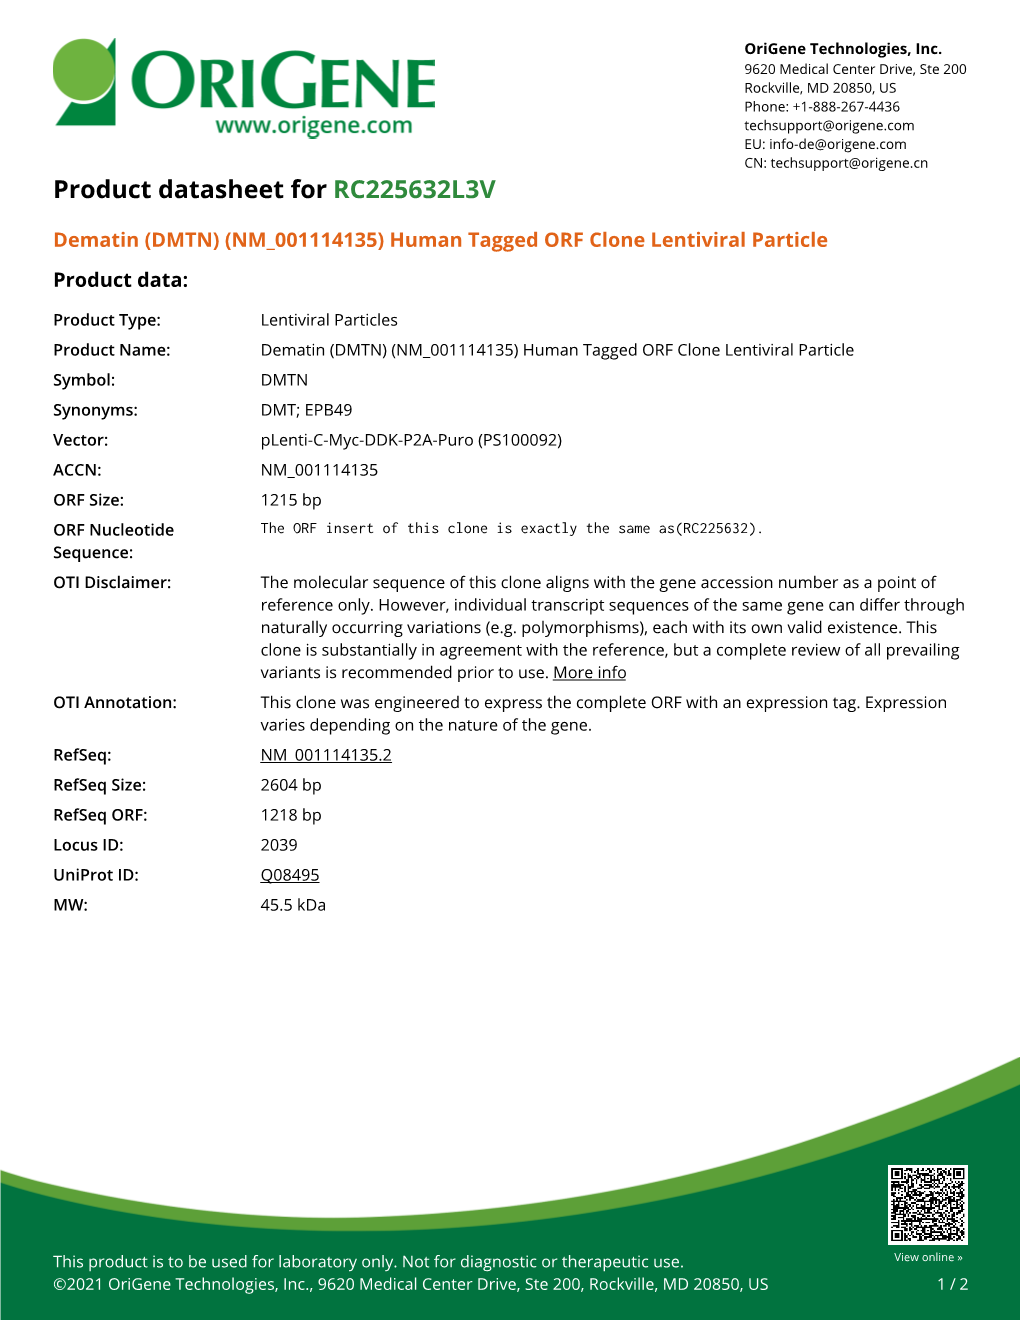 Dematin (DMTN) (NM 001114135) Human Tagged ORF Clone Lentiviral Particle Product Data